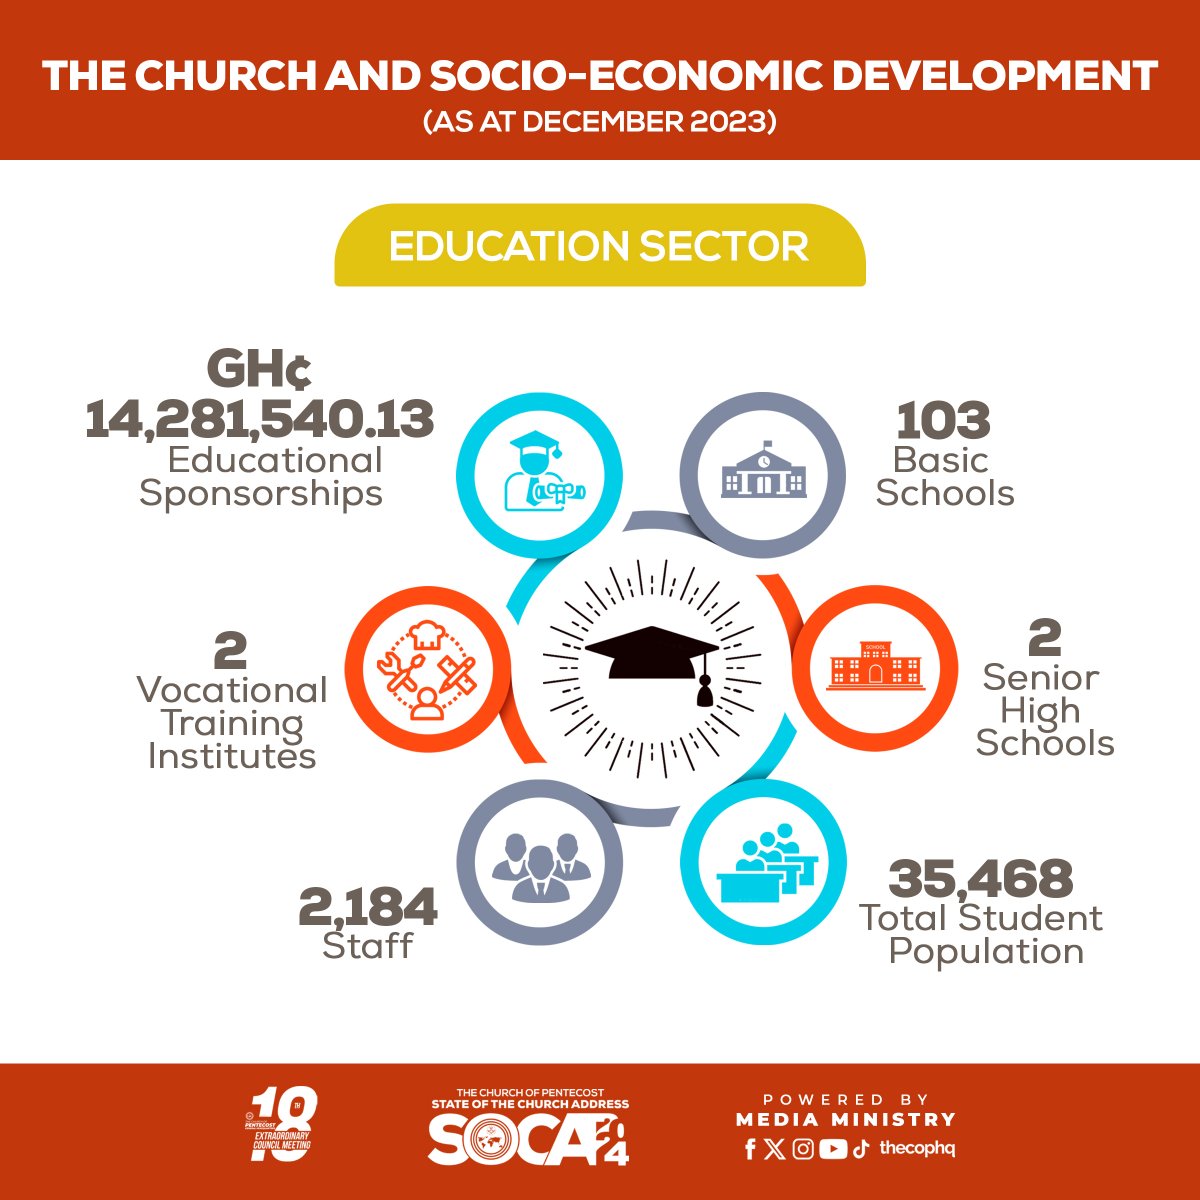 In 2023, the various Districts, Areas, and Ministries in Ghana, together with the headquarters, spent GHS14,281,540.13 to sponsor the educational pursuits of members of the Church at various levels.

1/3